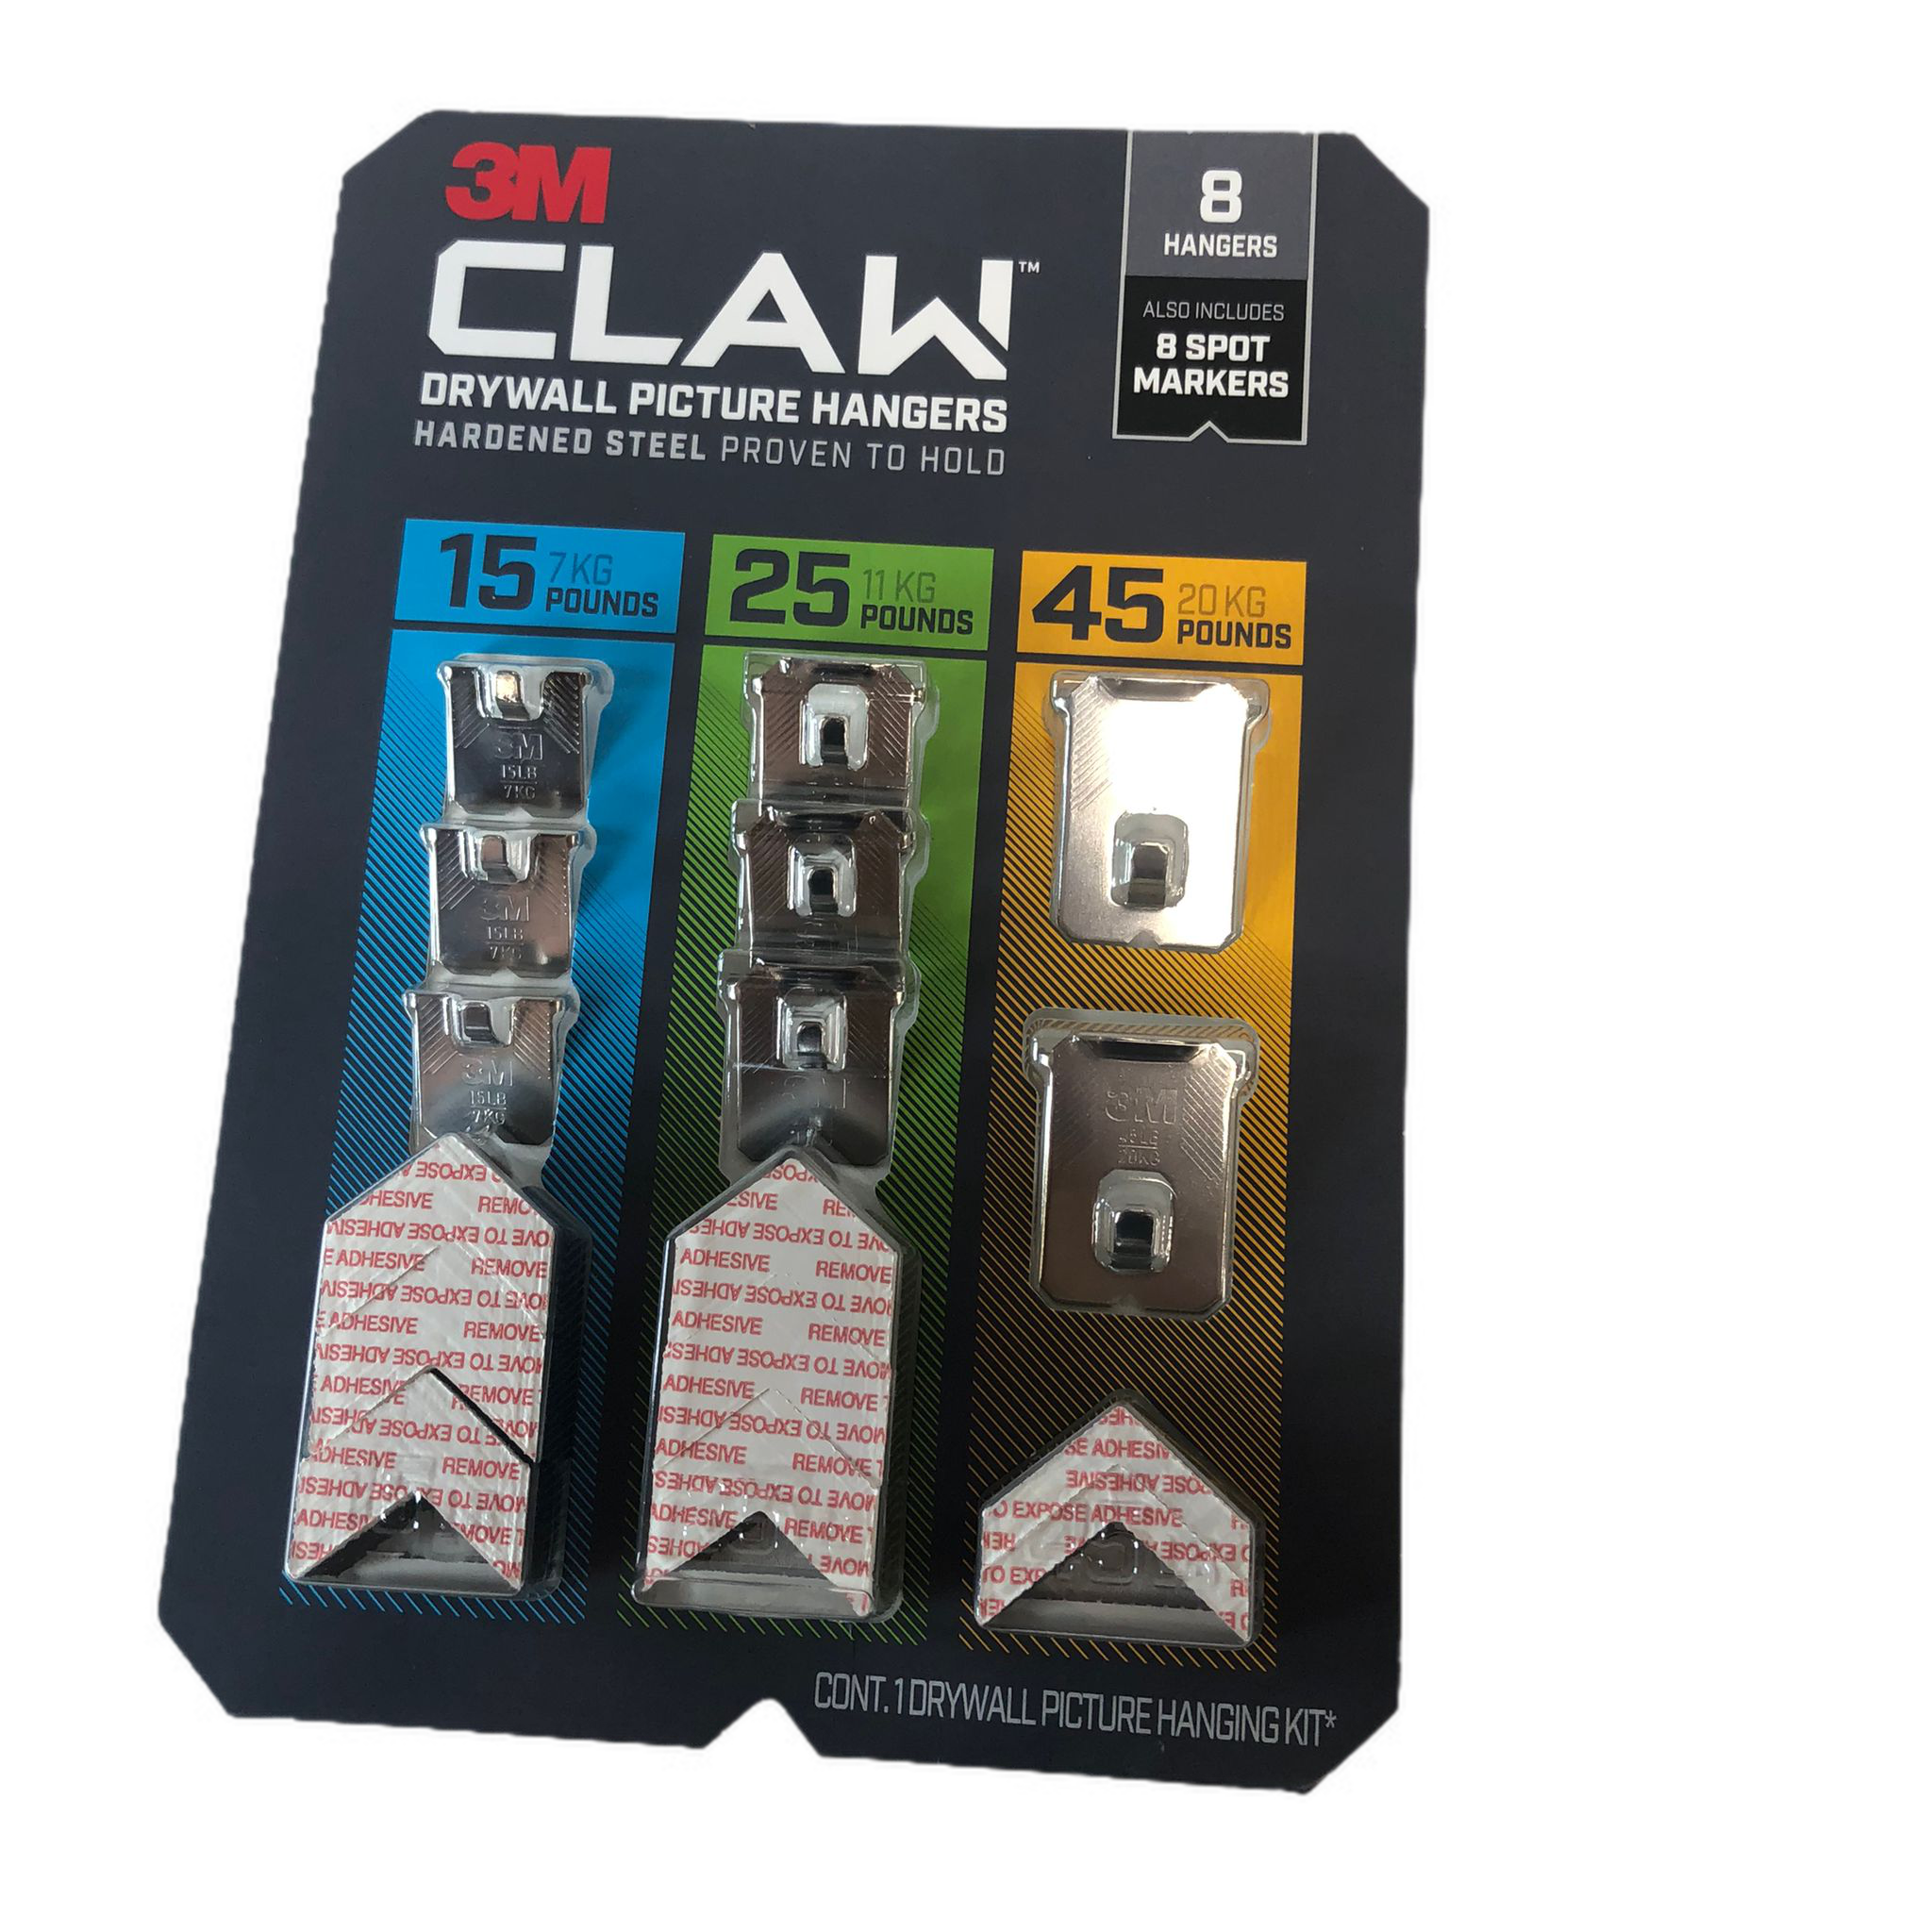 3M Claw Drywall Picture Hangers, 8 Hangers